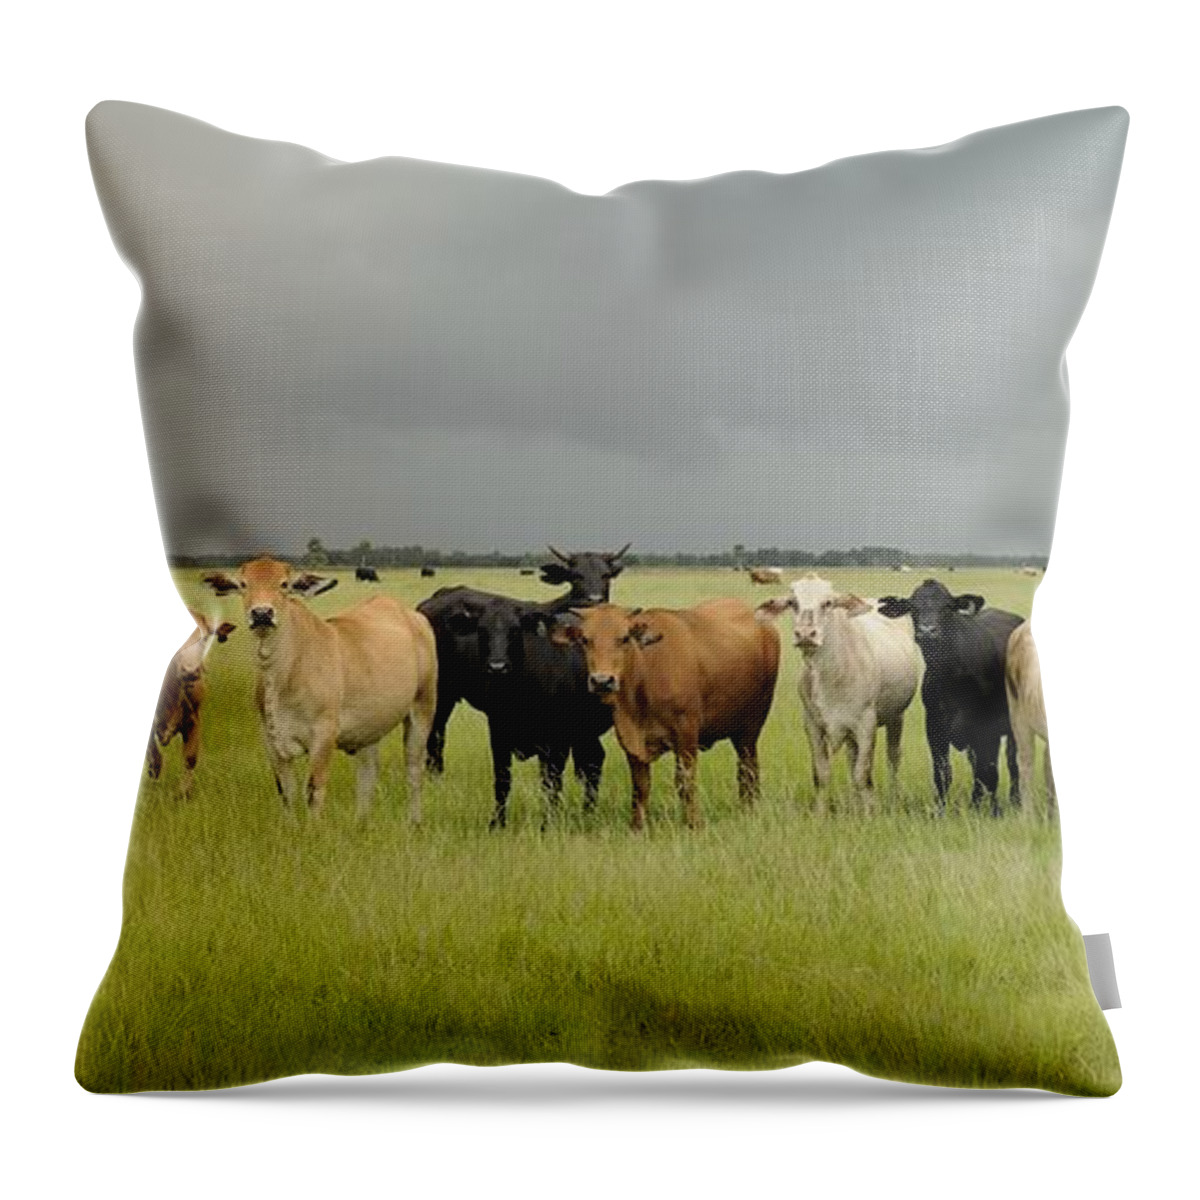 Cattle Throw Pillow featuring the photograph Florida Cattle Ranch by Bradford Martin